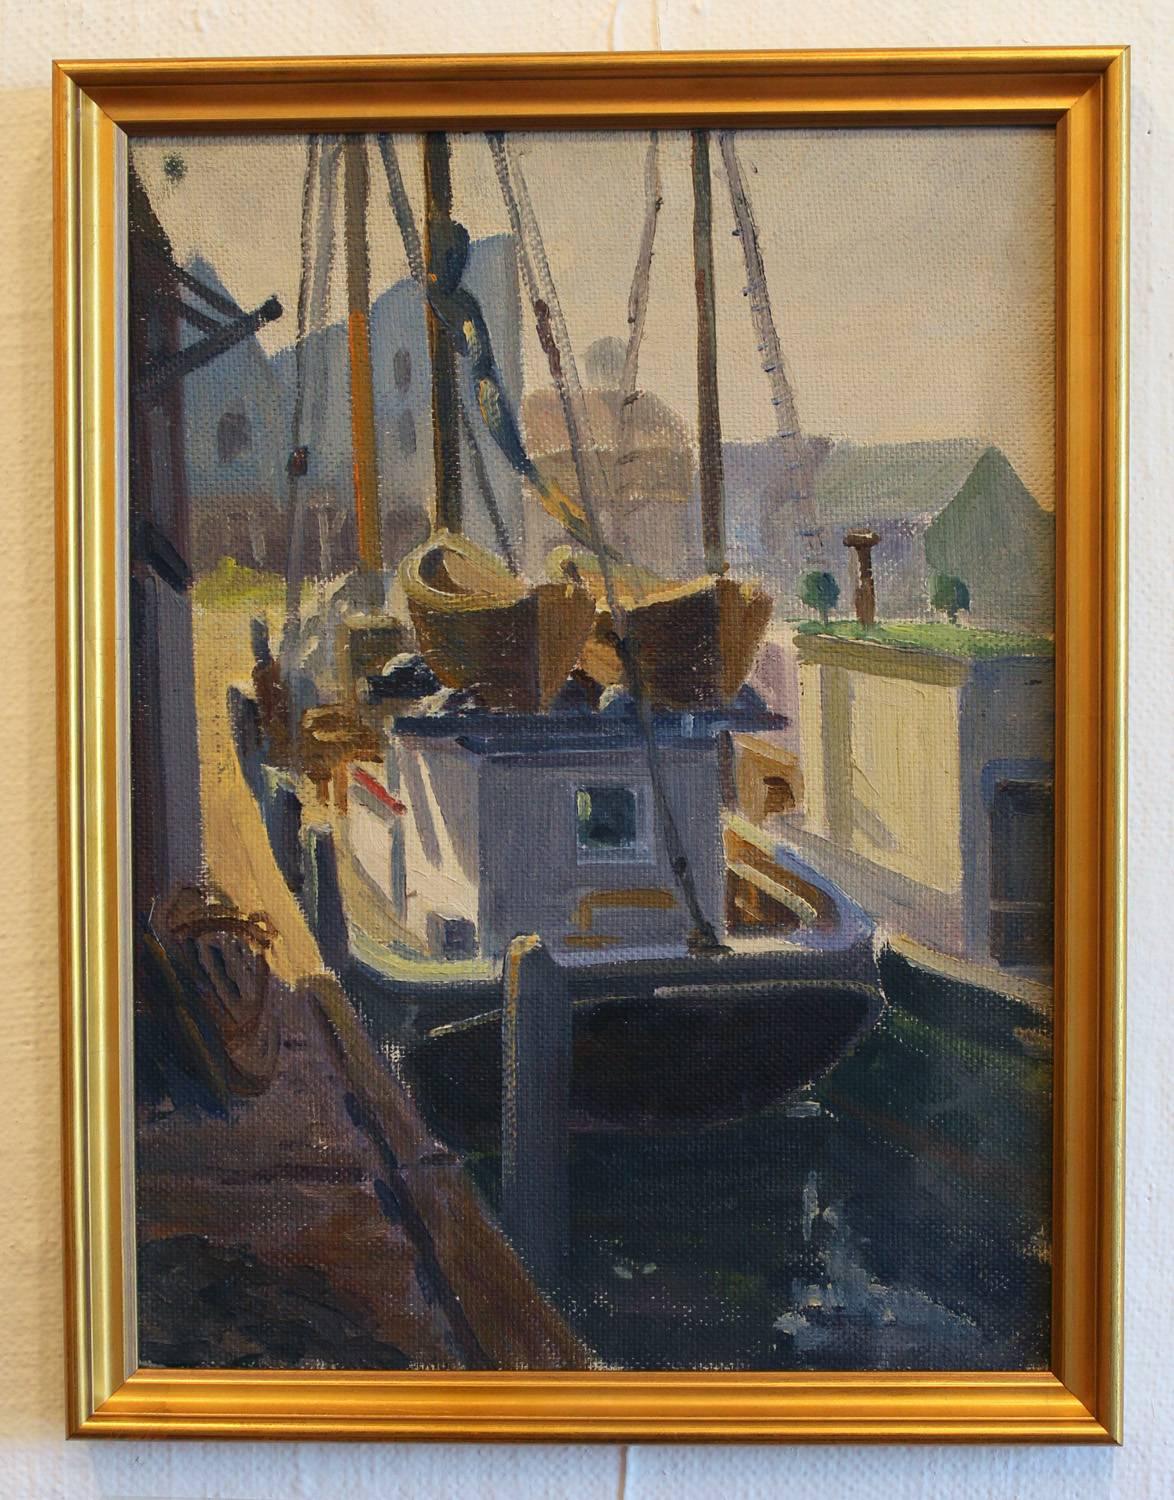 Boatyard - Painting by Julius Richter